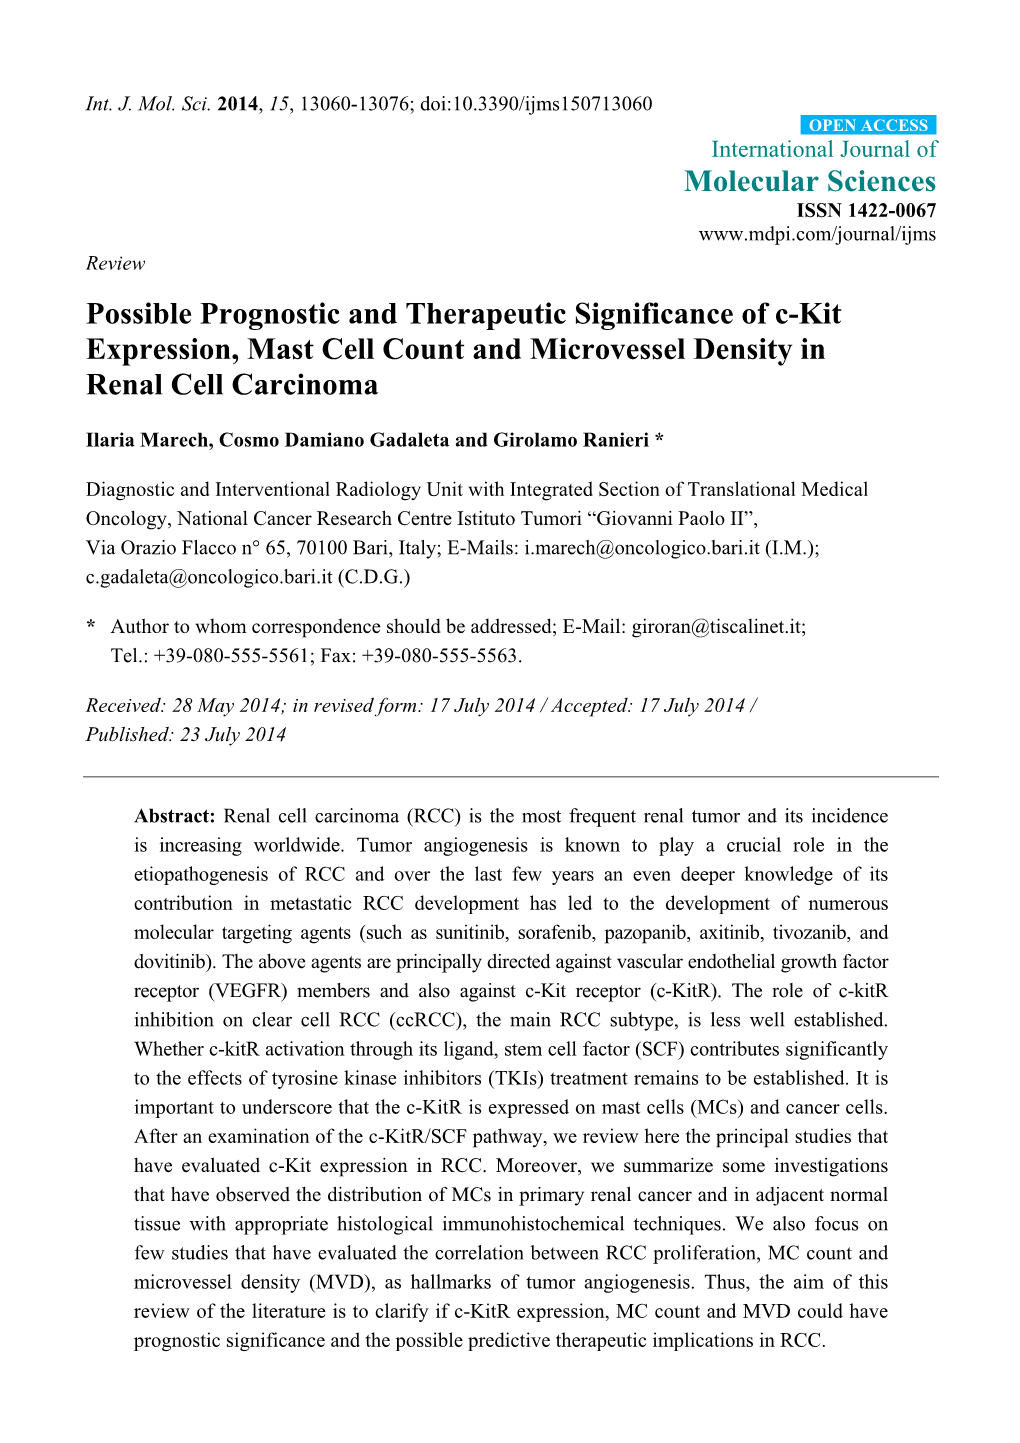 Possible Prognostic and Therapeutic Significance of C-Kit Expression, Mast Cell Count and Microvessel Density in Renal Cell Carcinoma